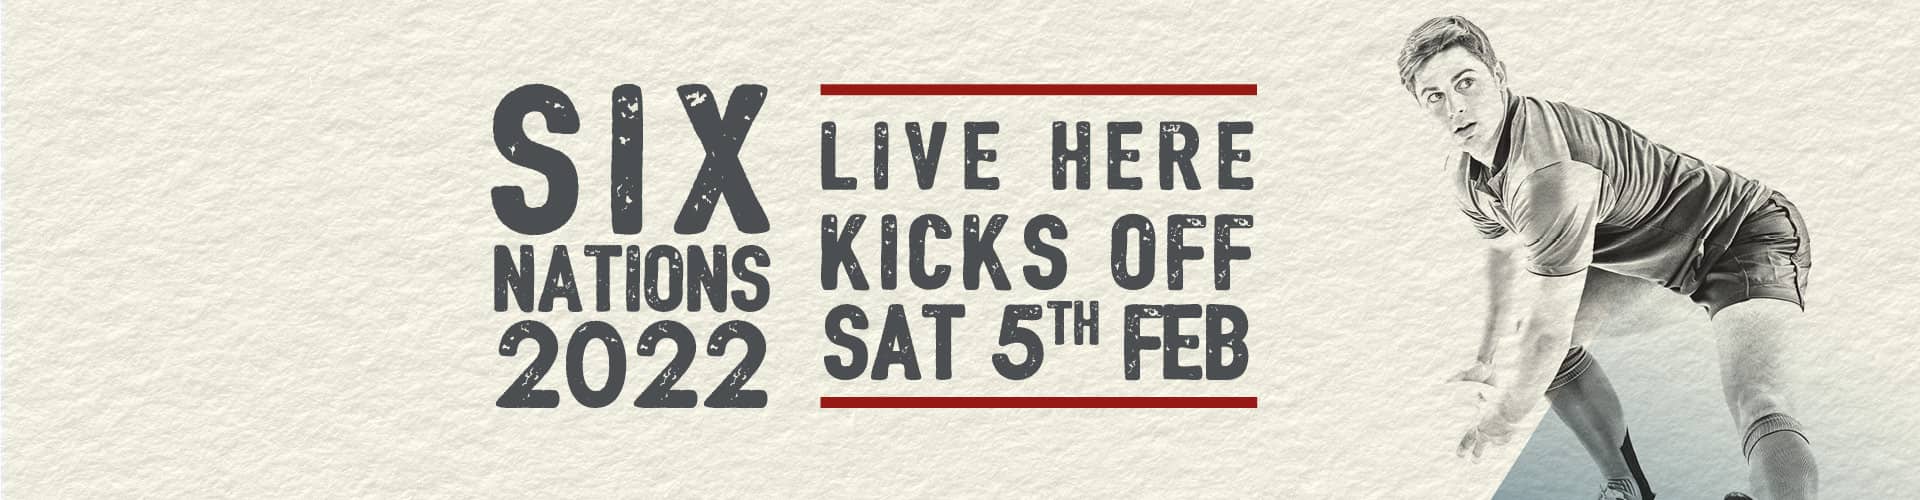 Watch the Six Nations live at Feathers Hotel